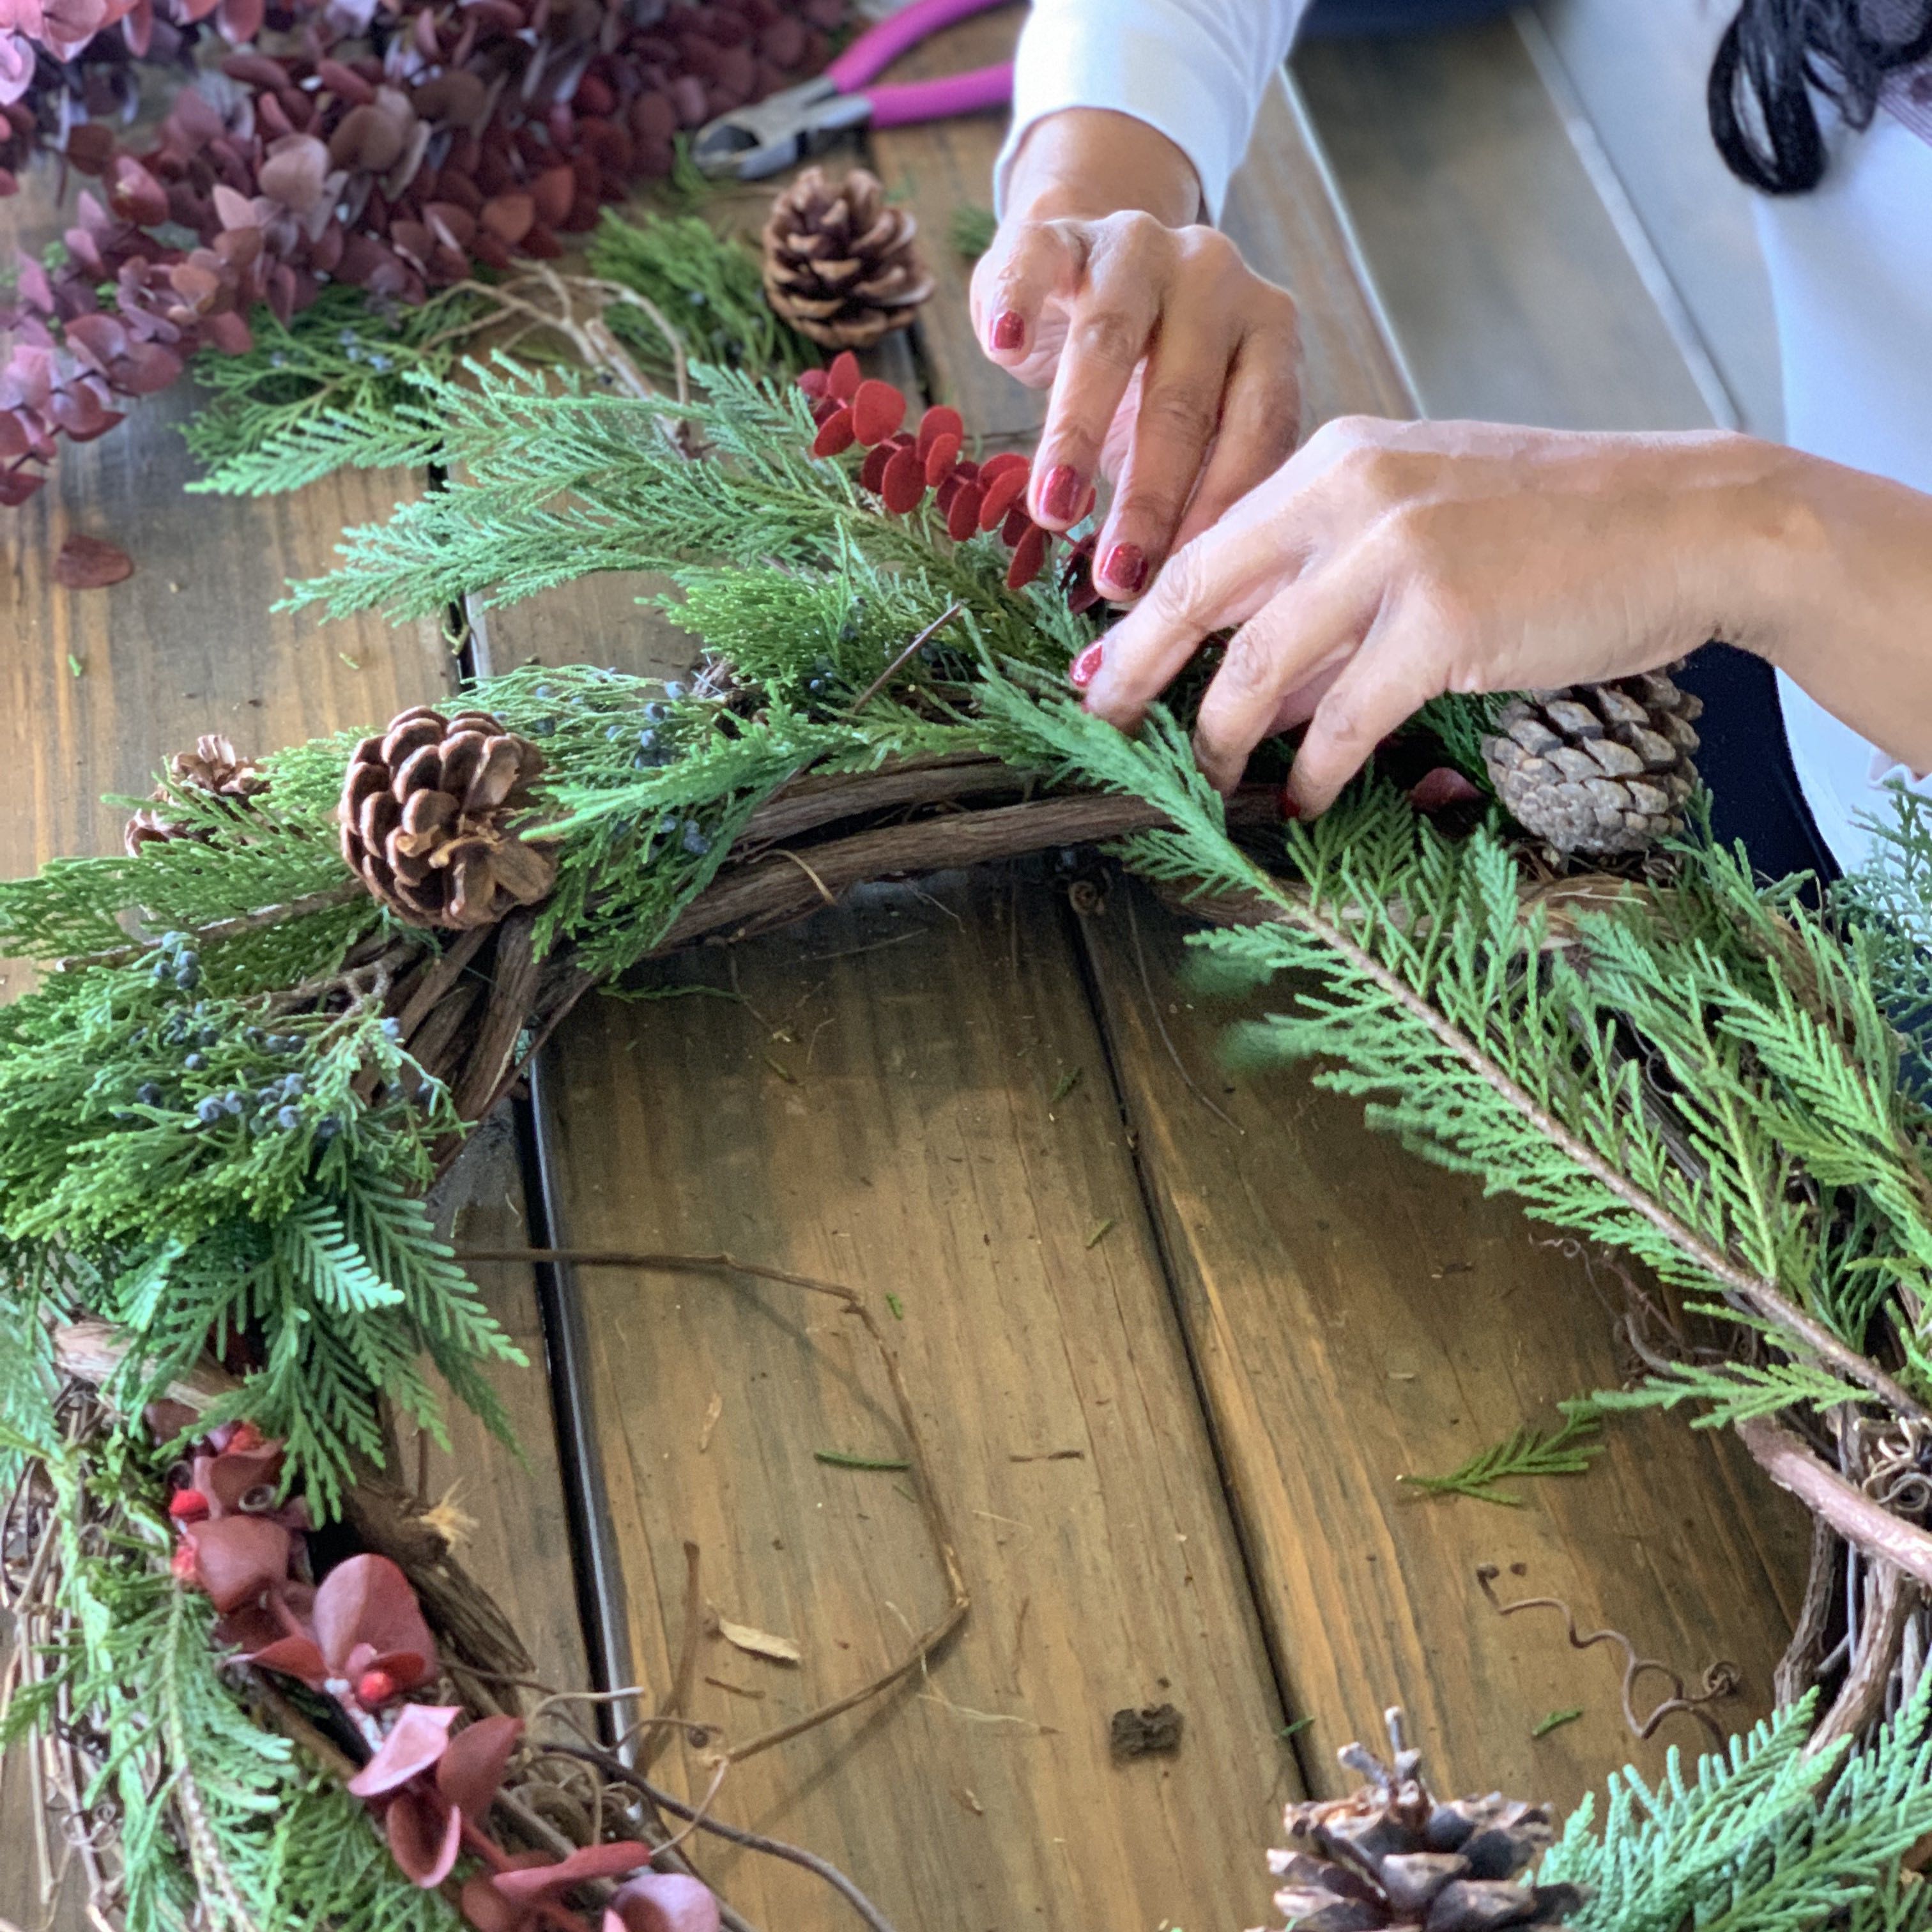 Woman makes a wreath by hand on a wooden tabletop.